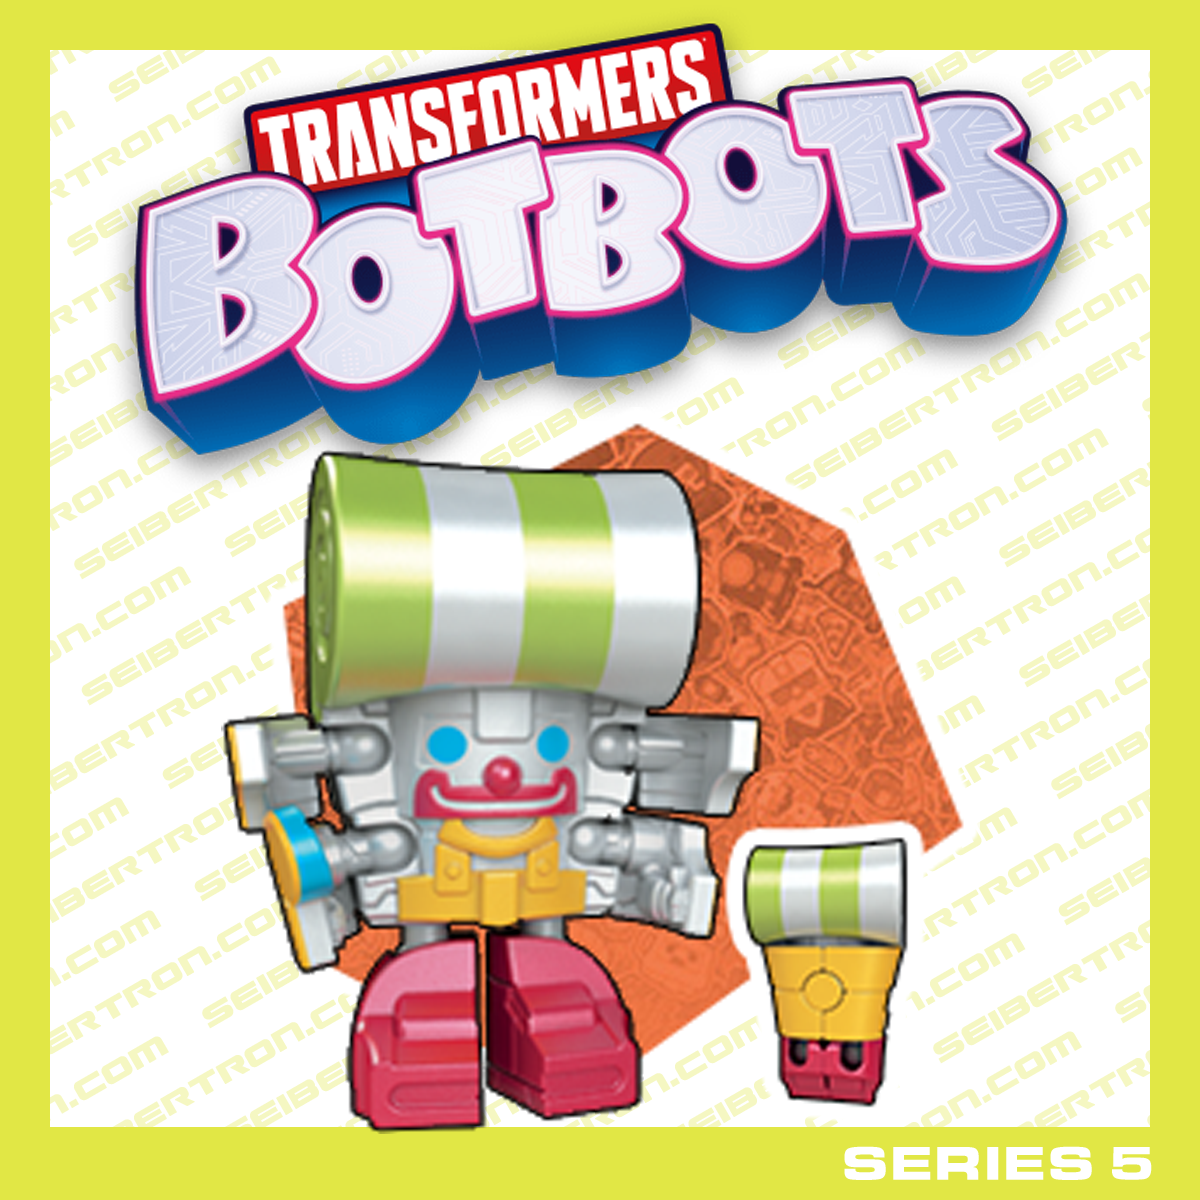 WAH-WAAAH THE CLOWN Transformers BotBots Series 5 Party Favors blowout 2020